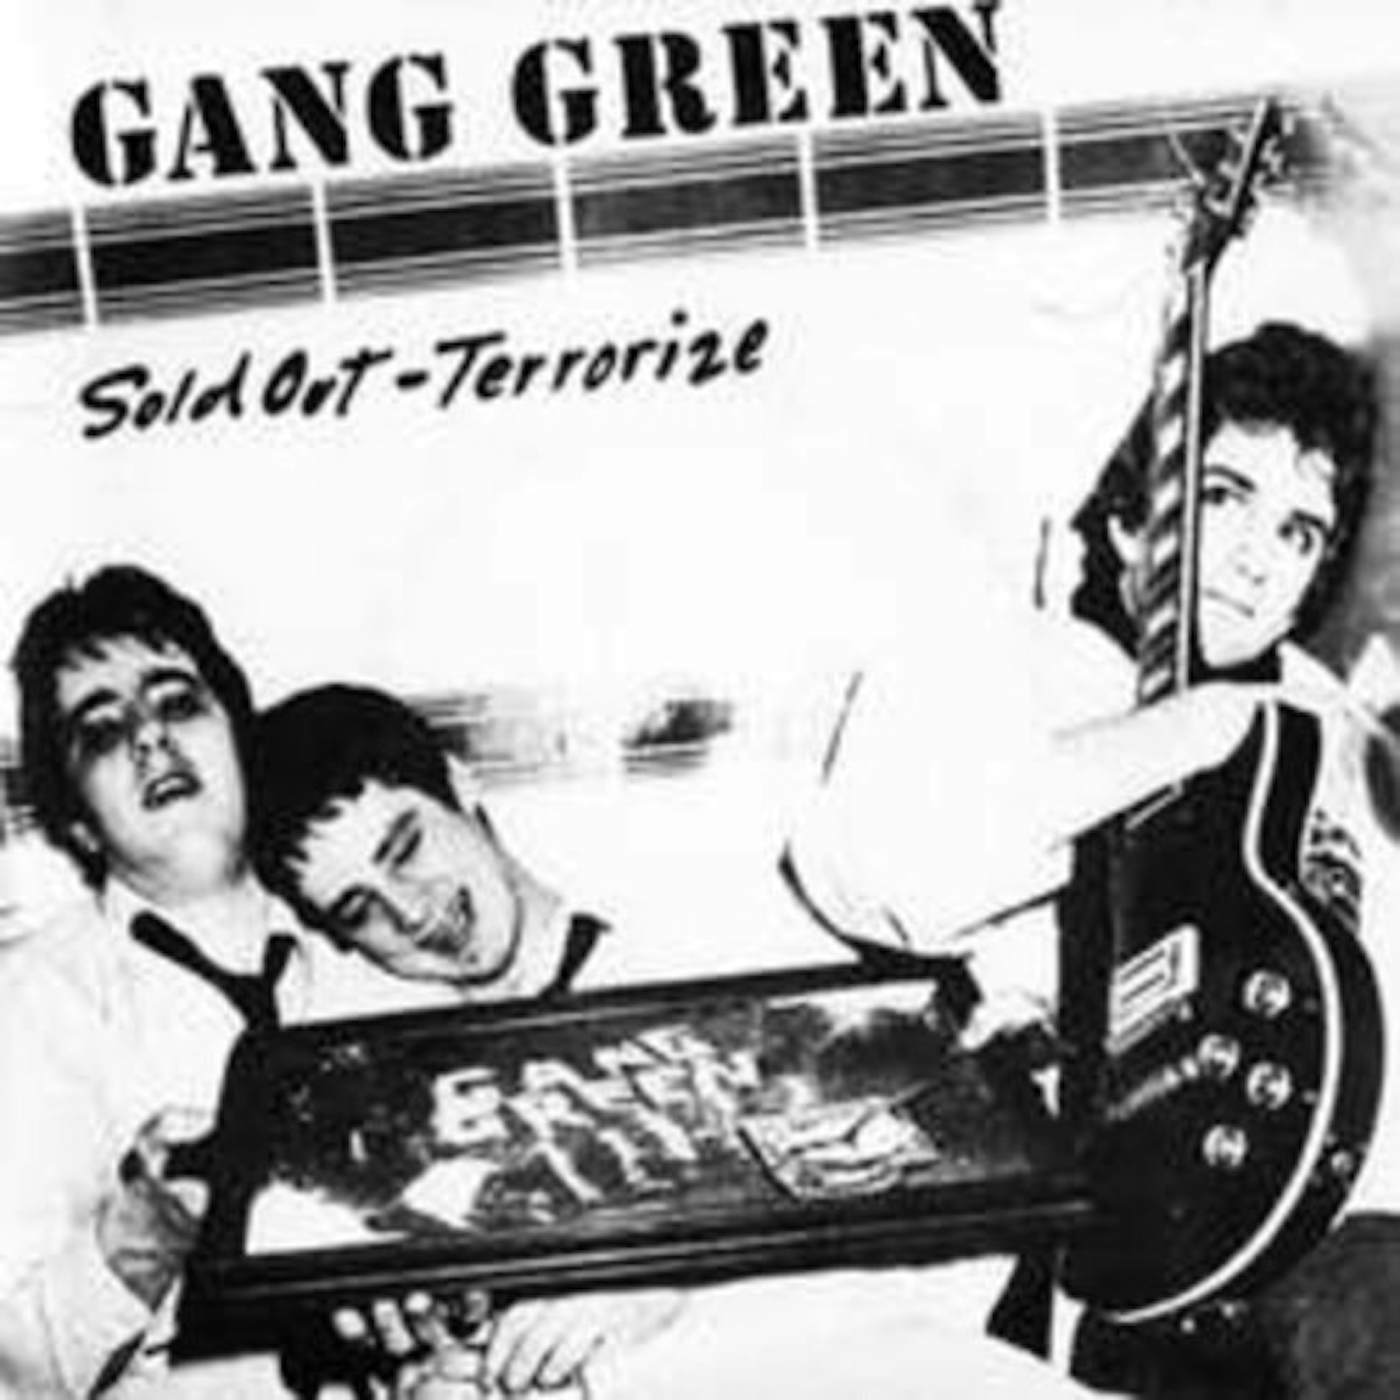 Gang Green SOLD OUT / TERRORIZE Vinyl Record